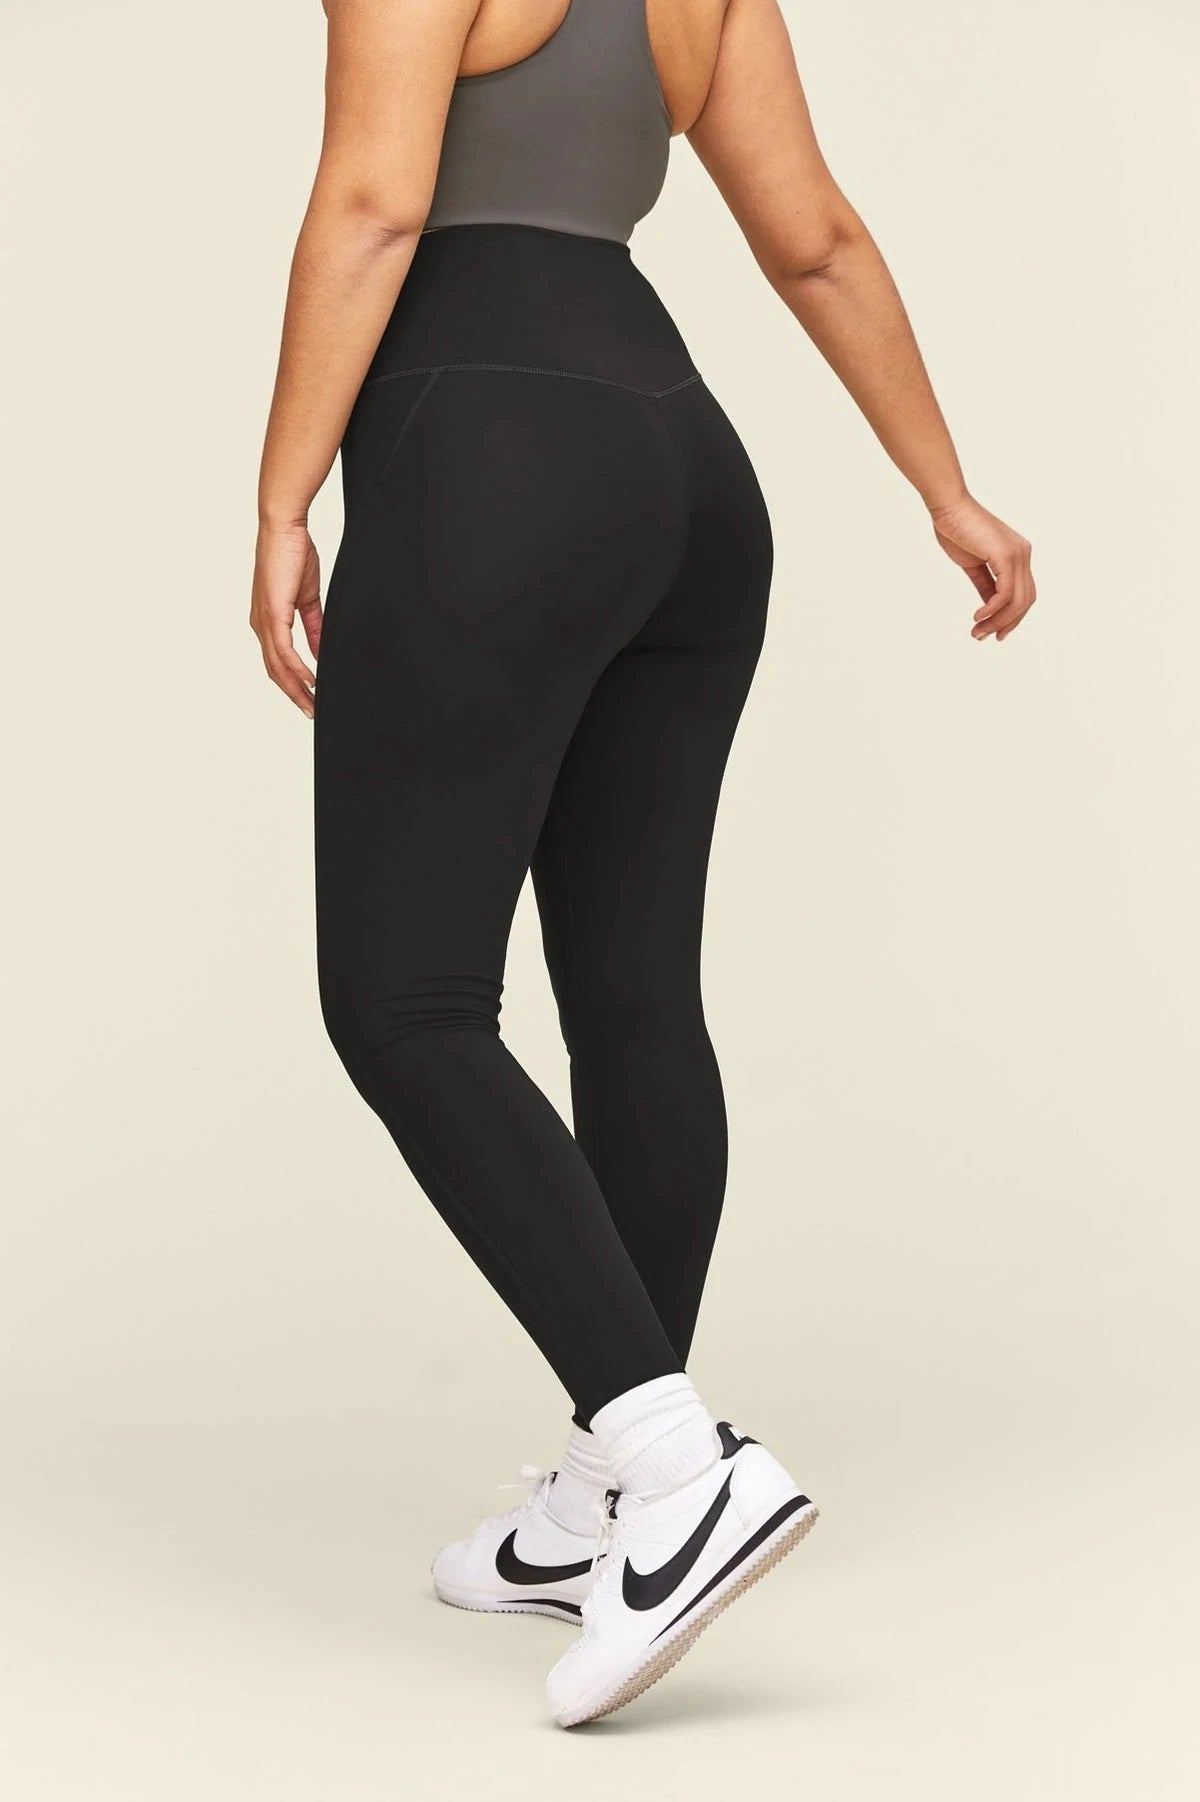 Girlfriend Collective Float high-rise Performance Leggings - Farfetch